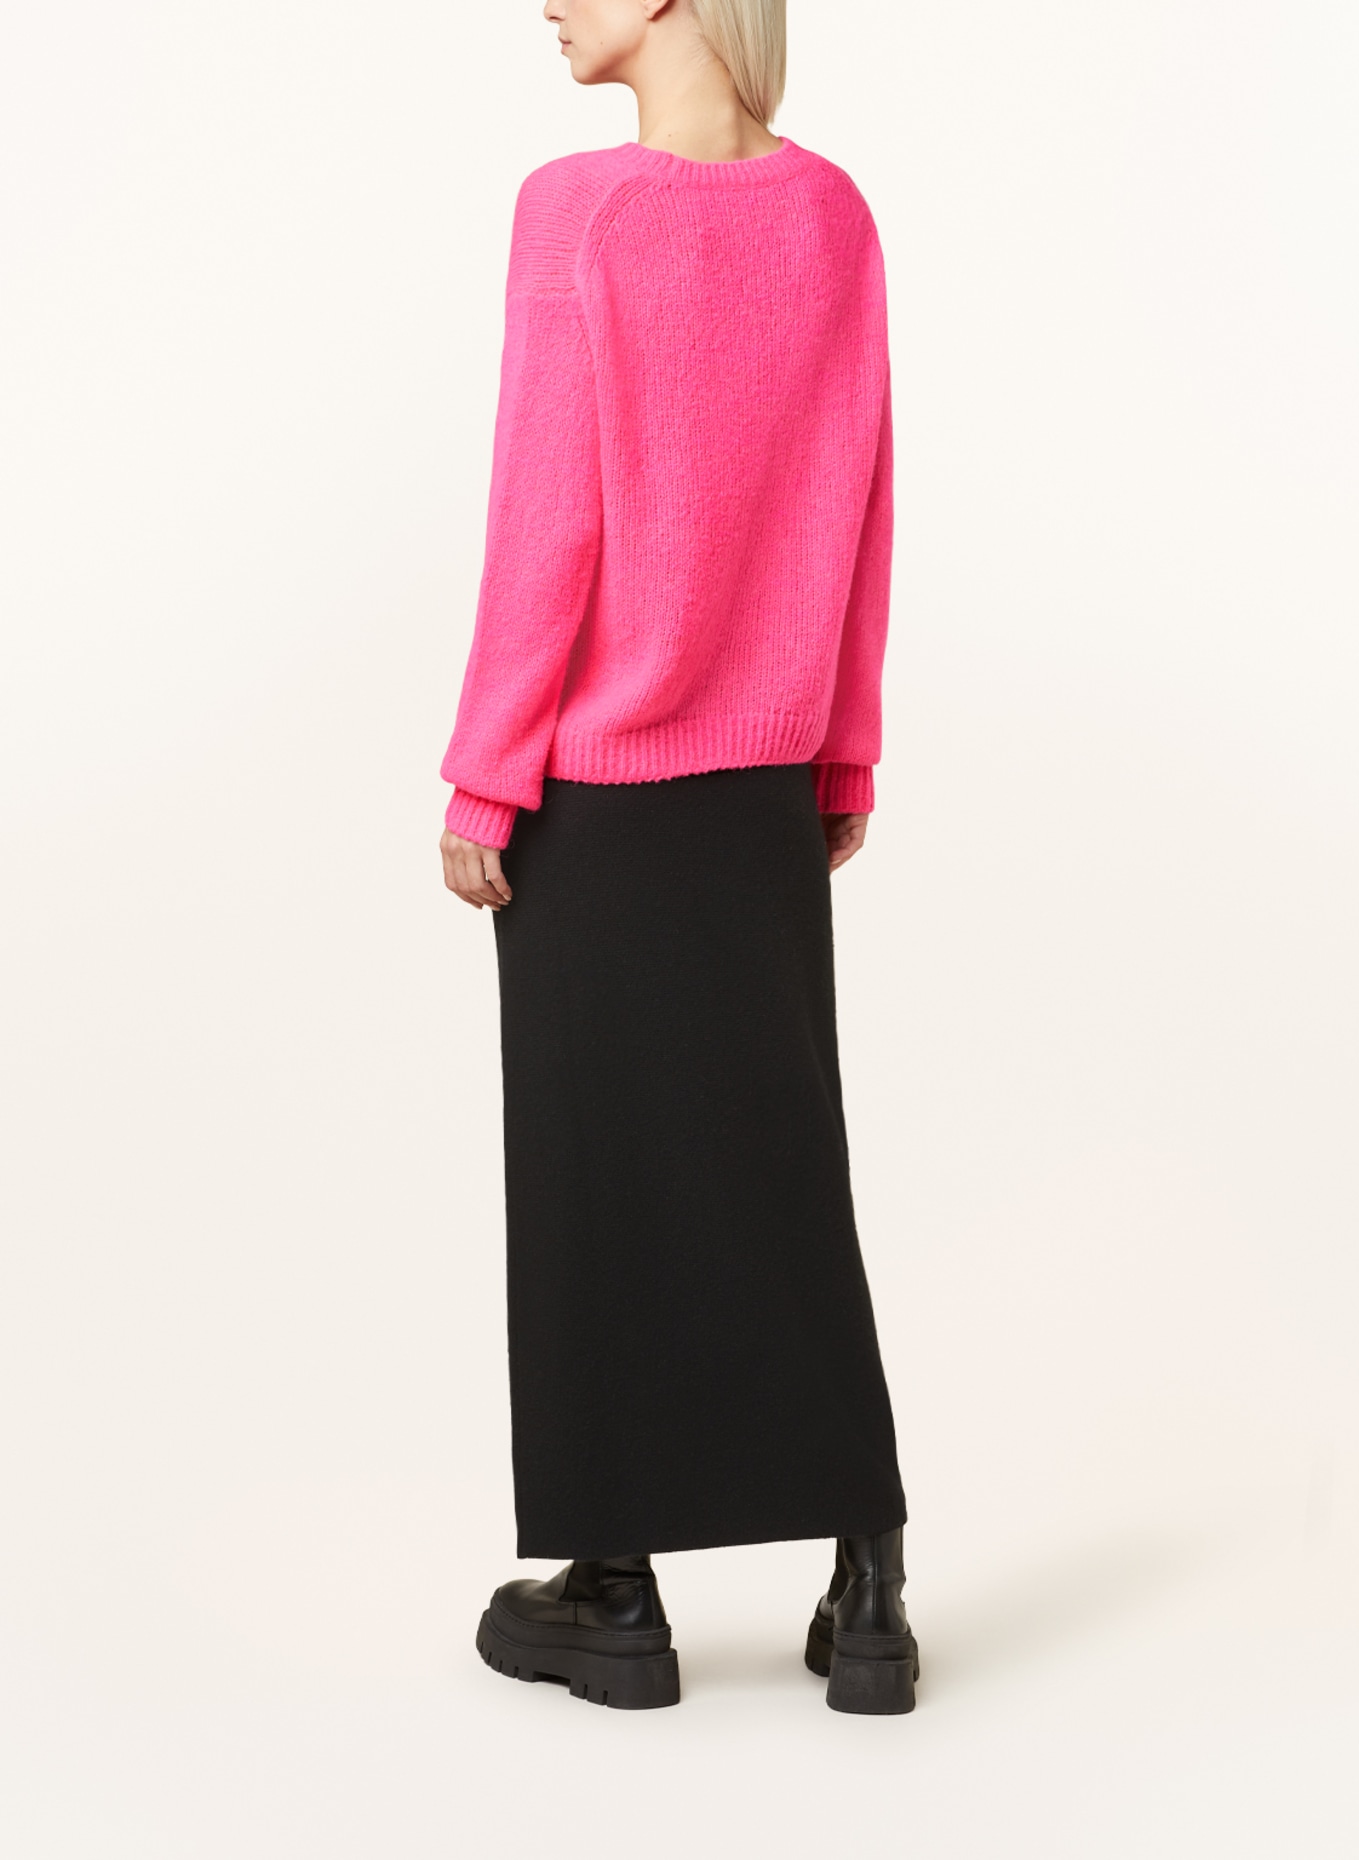 Princess GOES HOLLYWOOD Sweater with merino wool, Color: NEON PINK (Image 3)